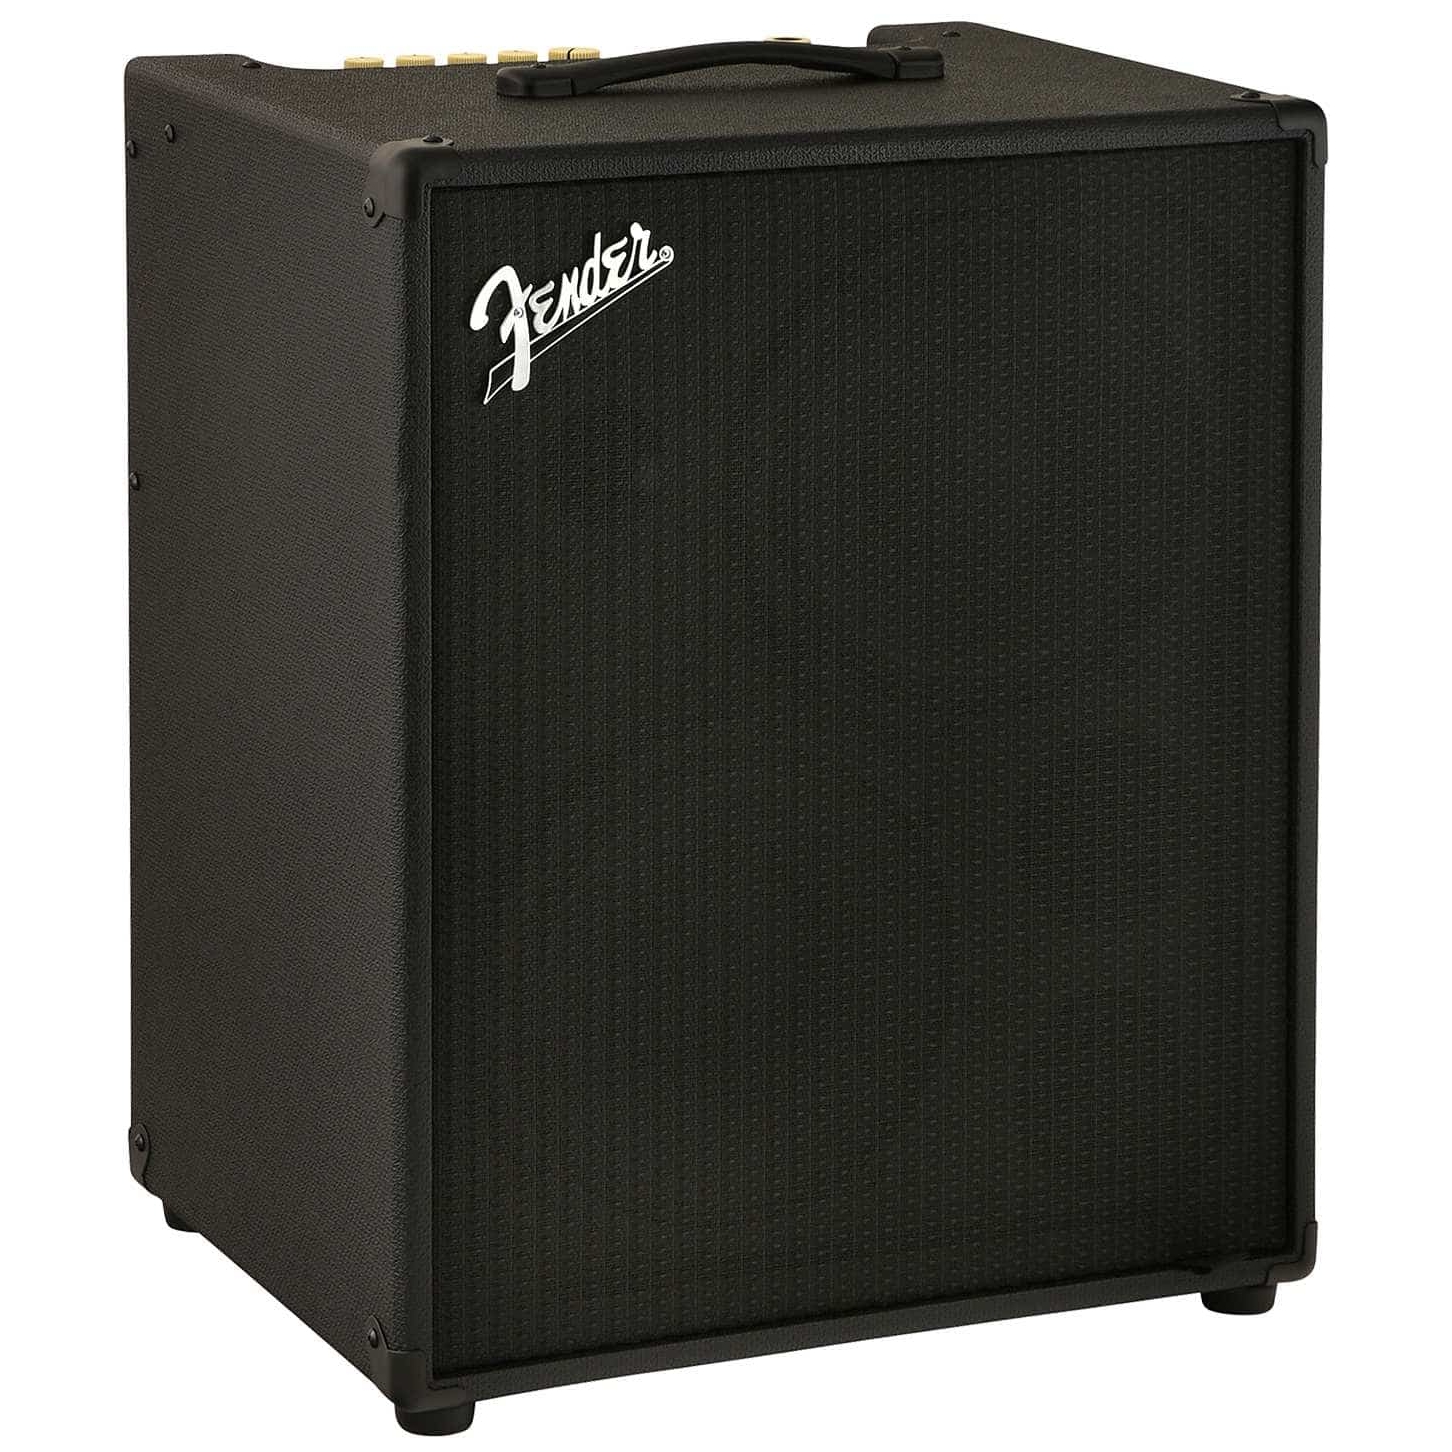 Fender Rumble Stage 800 Combo B-Ware